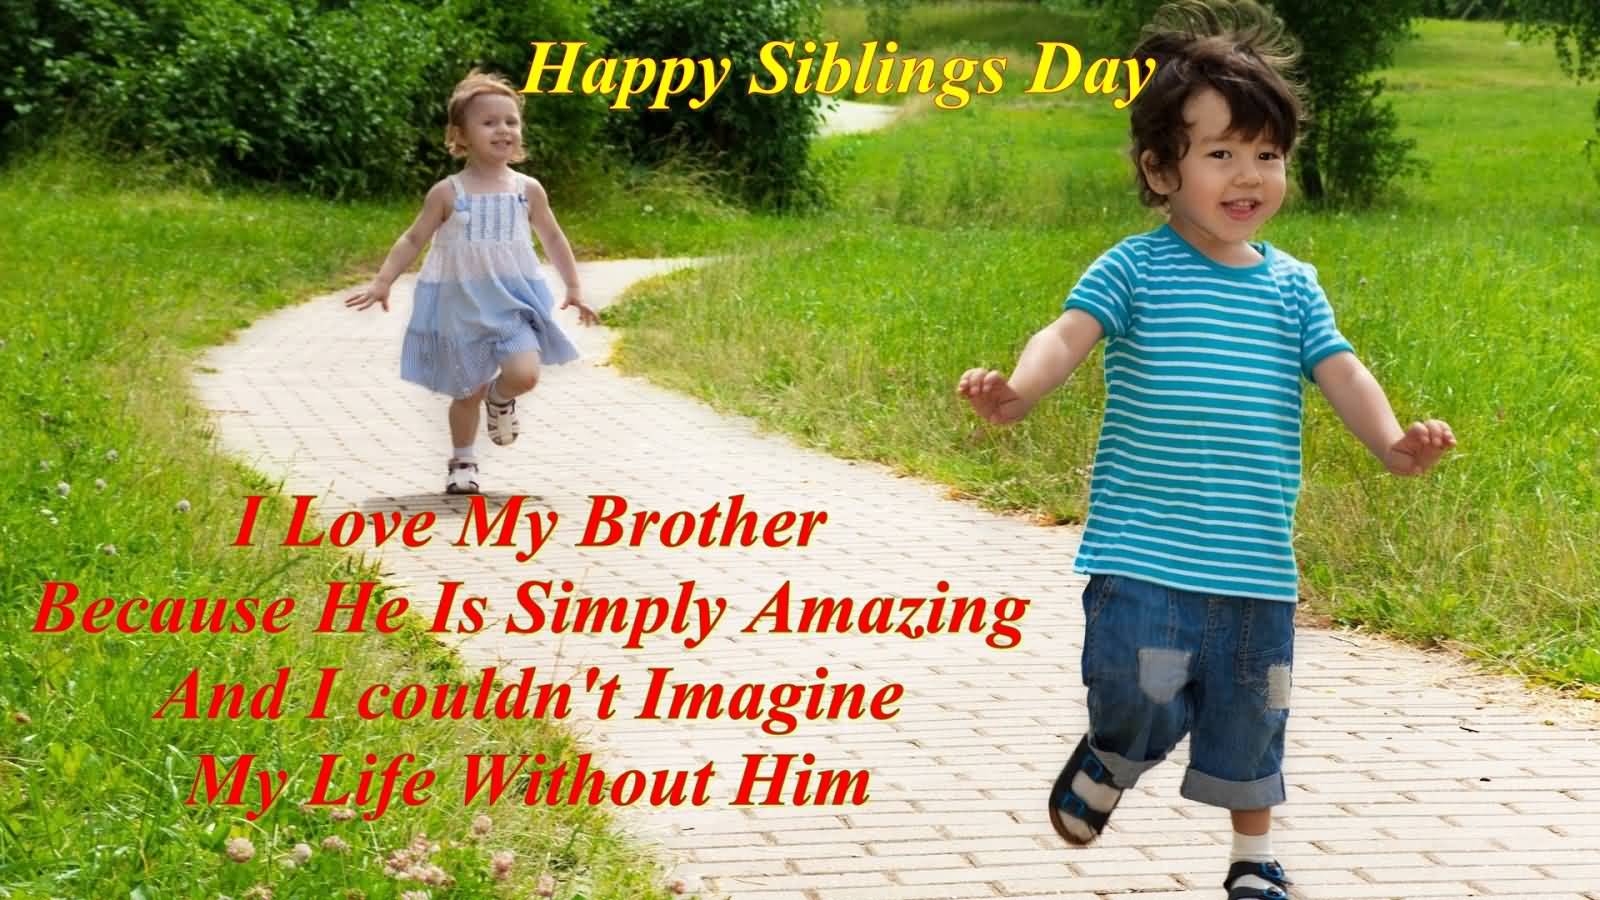 Happy Siblings Day I Love My Brother Because He Is Simply Amazing And I Couldn't Imagine My Life Without Him